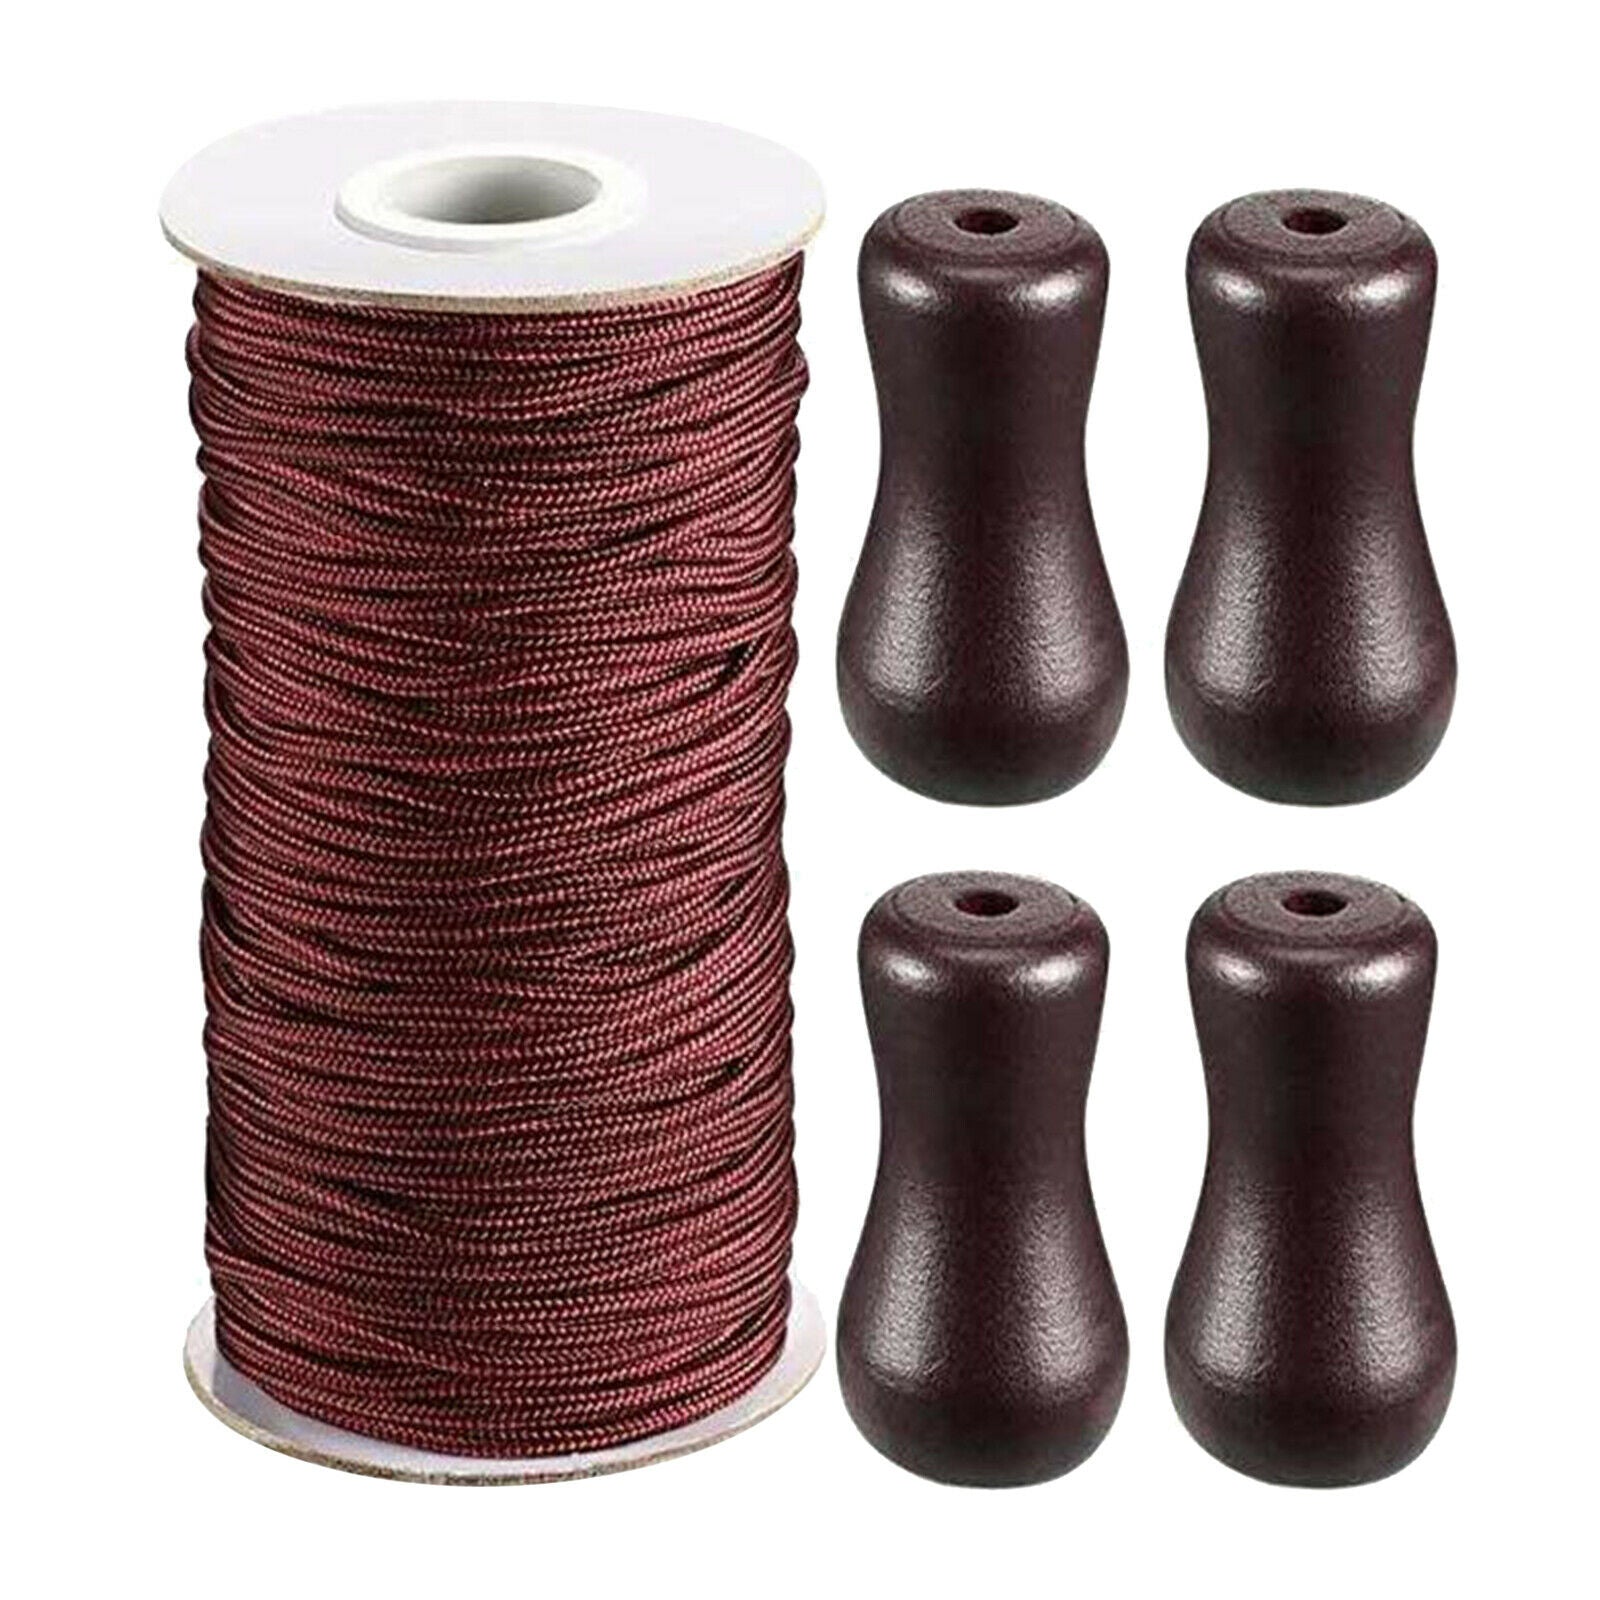 Brown Braided Lift Shade Cord 55 Yards/Roll with 4 Pieces Brown Wood Pendant for